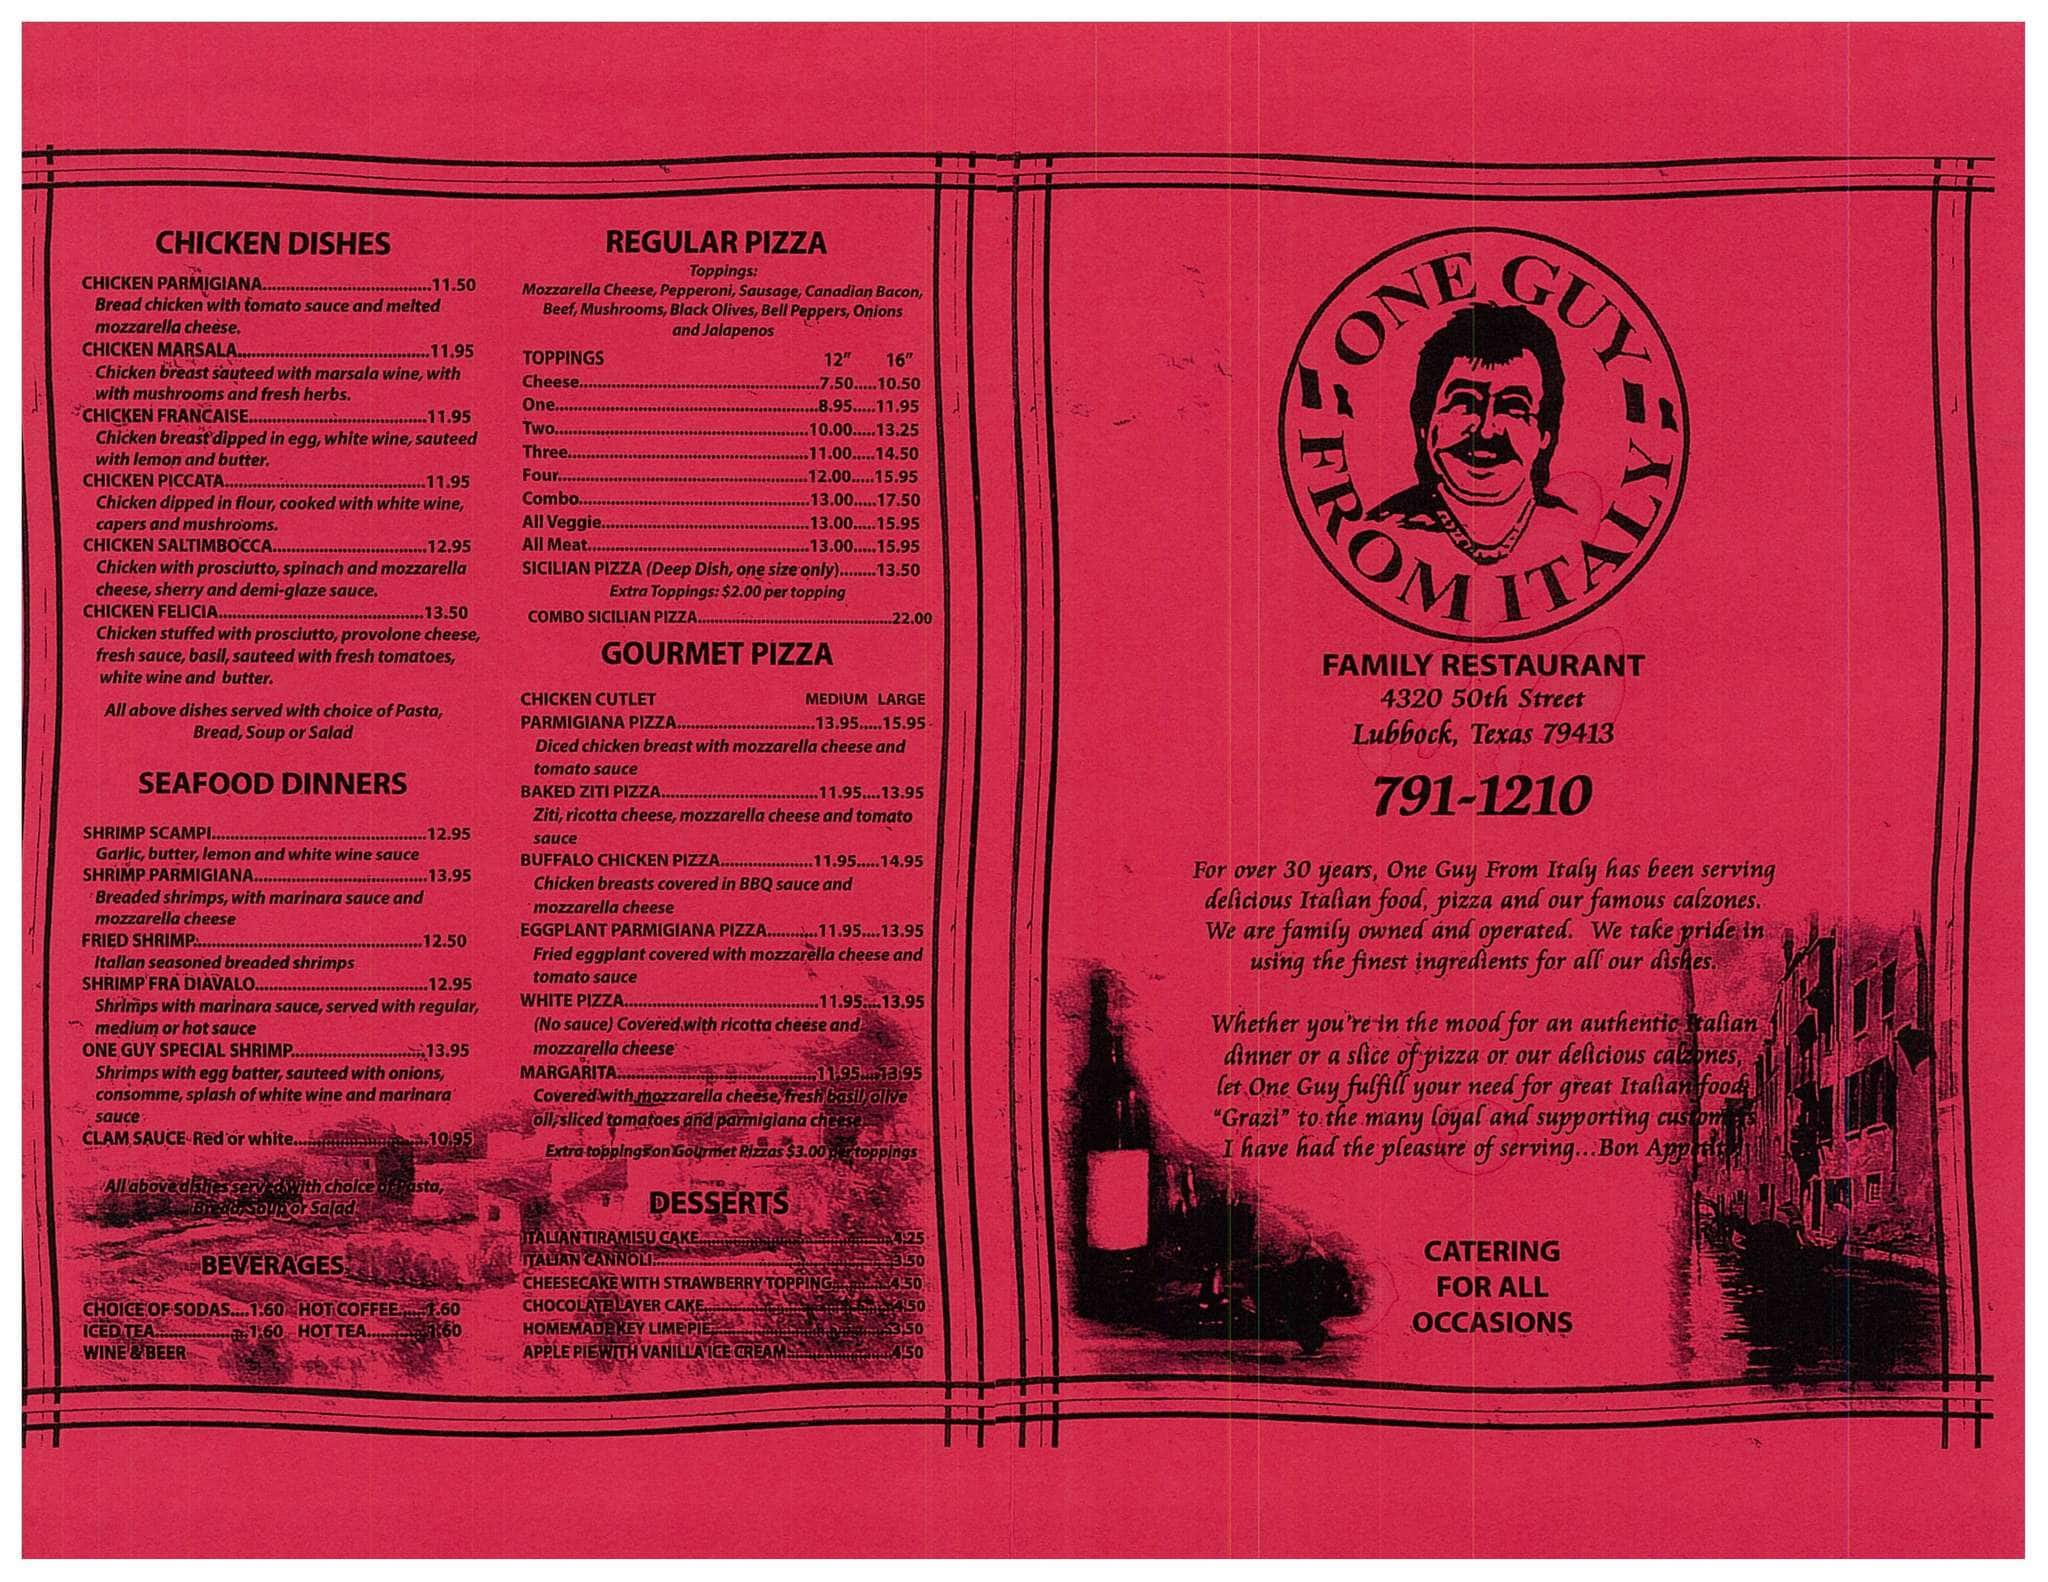 One Guy From Italy Restaurant Menu